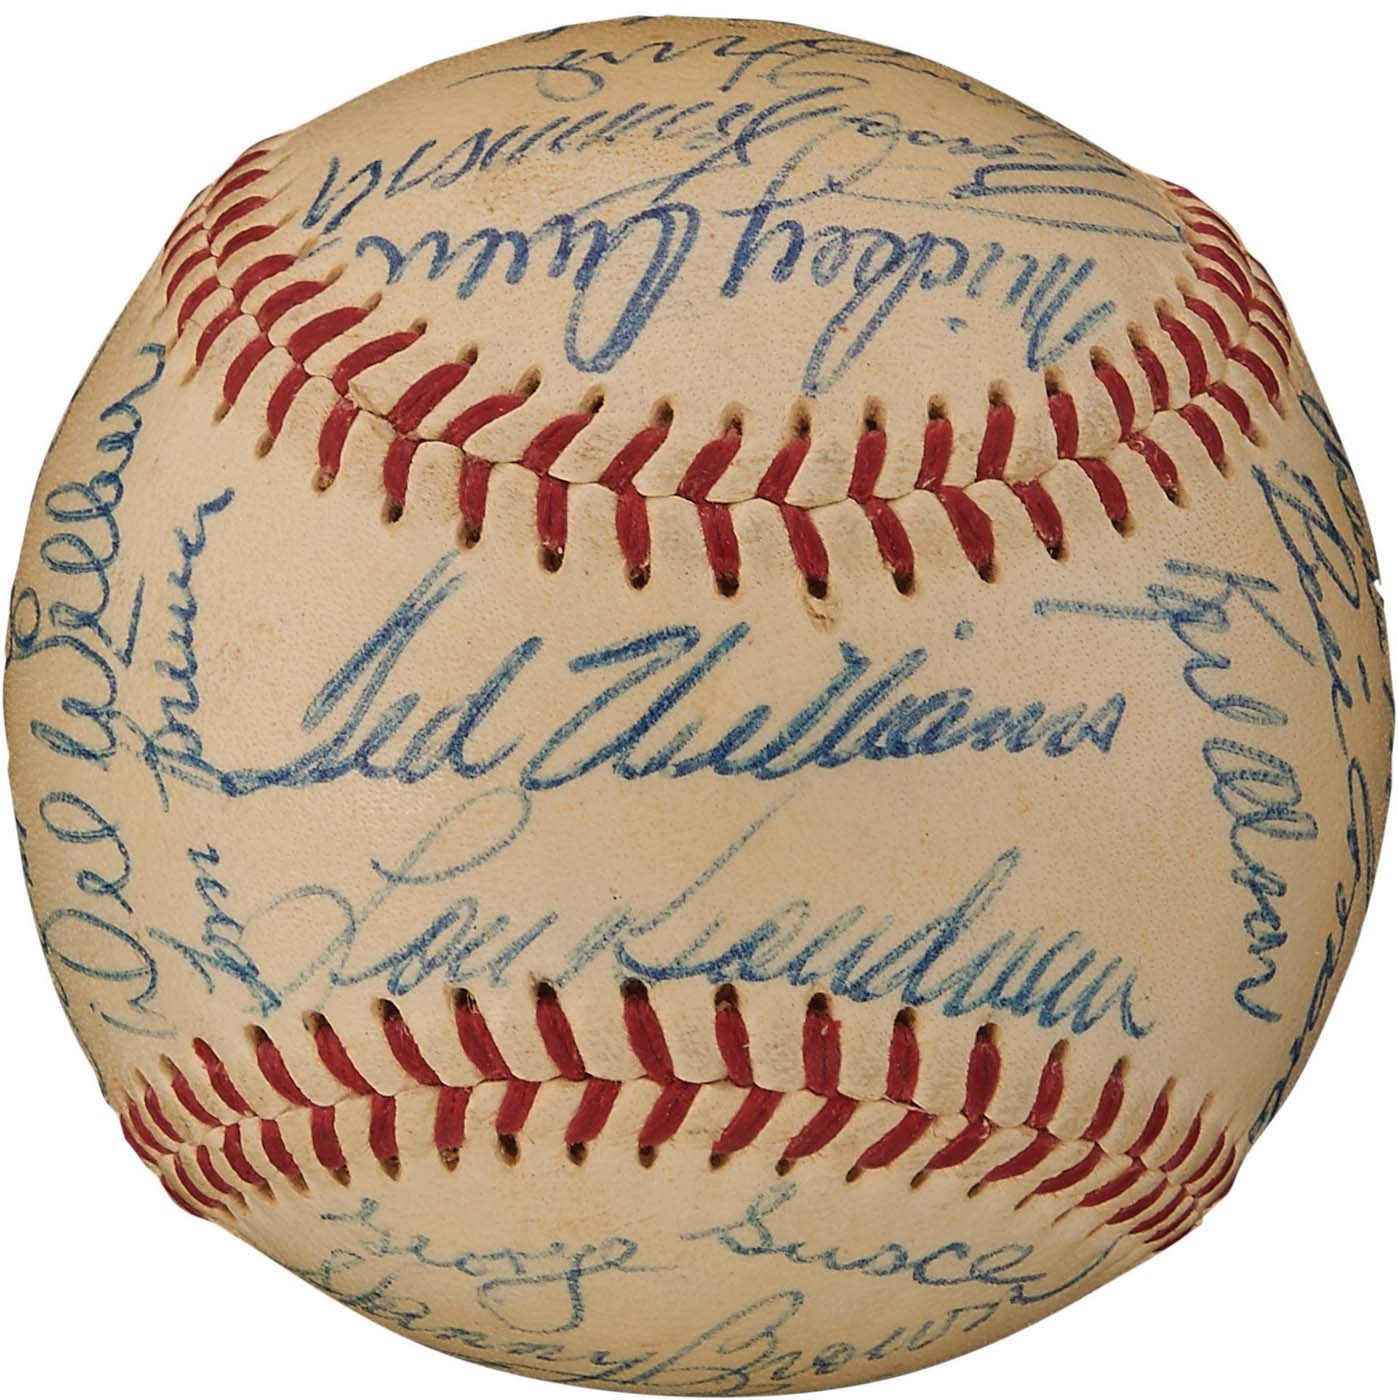 1954 Boston Red Sox Team-Signed Baseball with Harry Agganis (PSA NM+ 7.5)